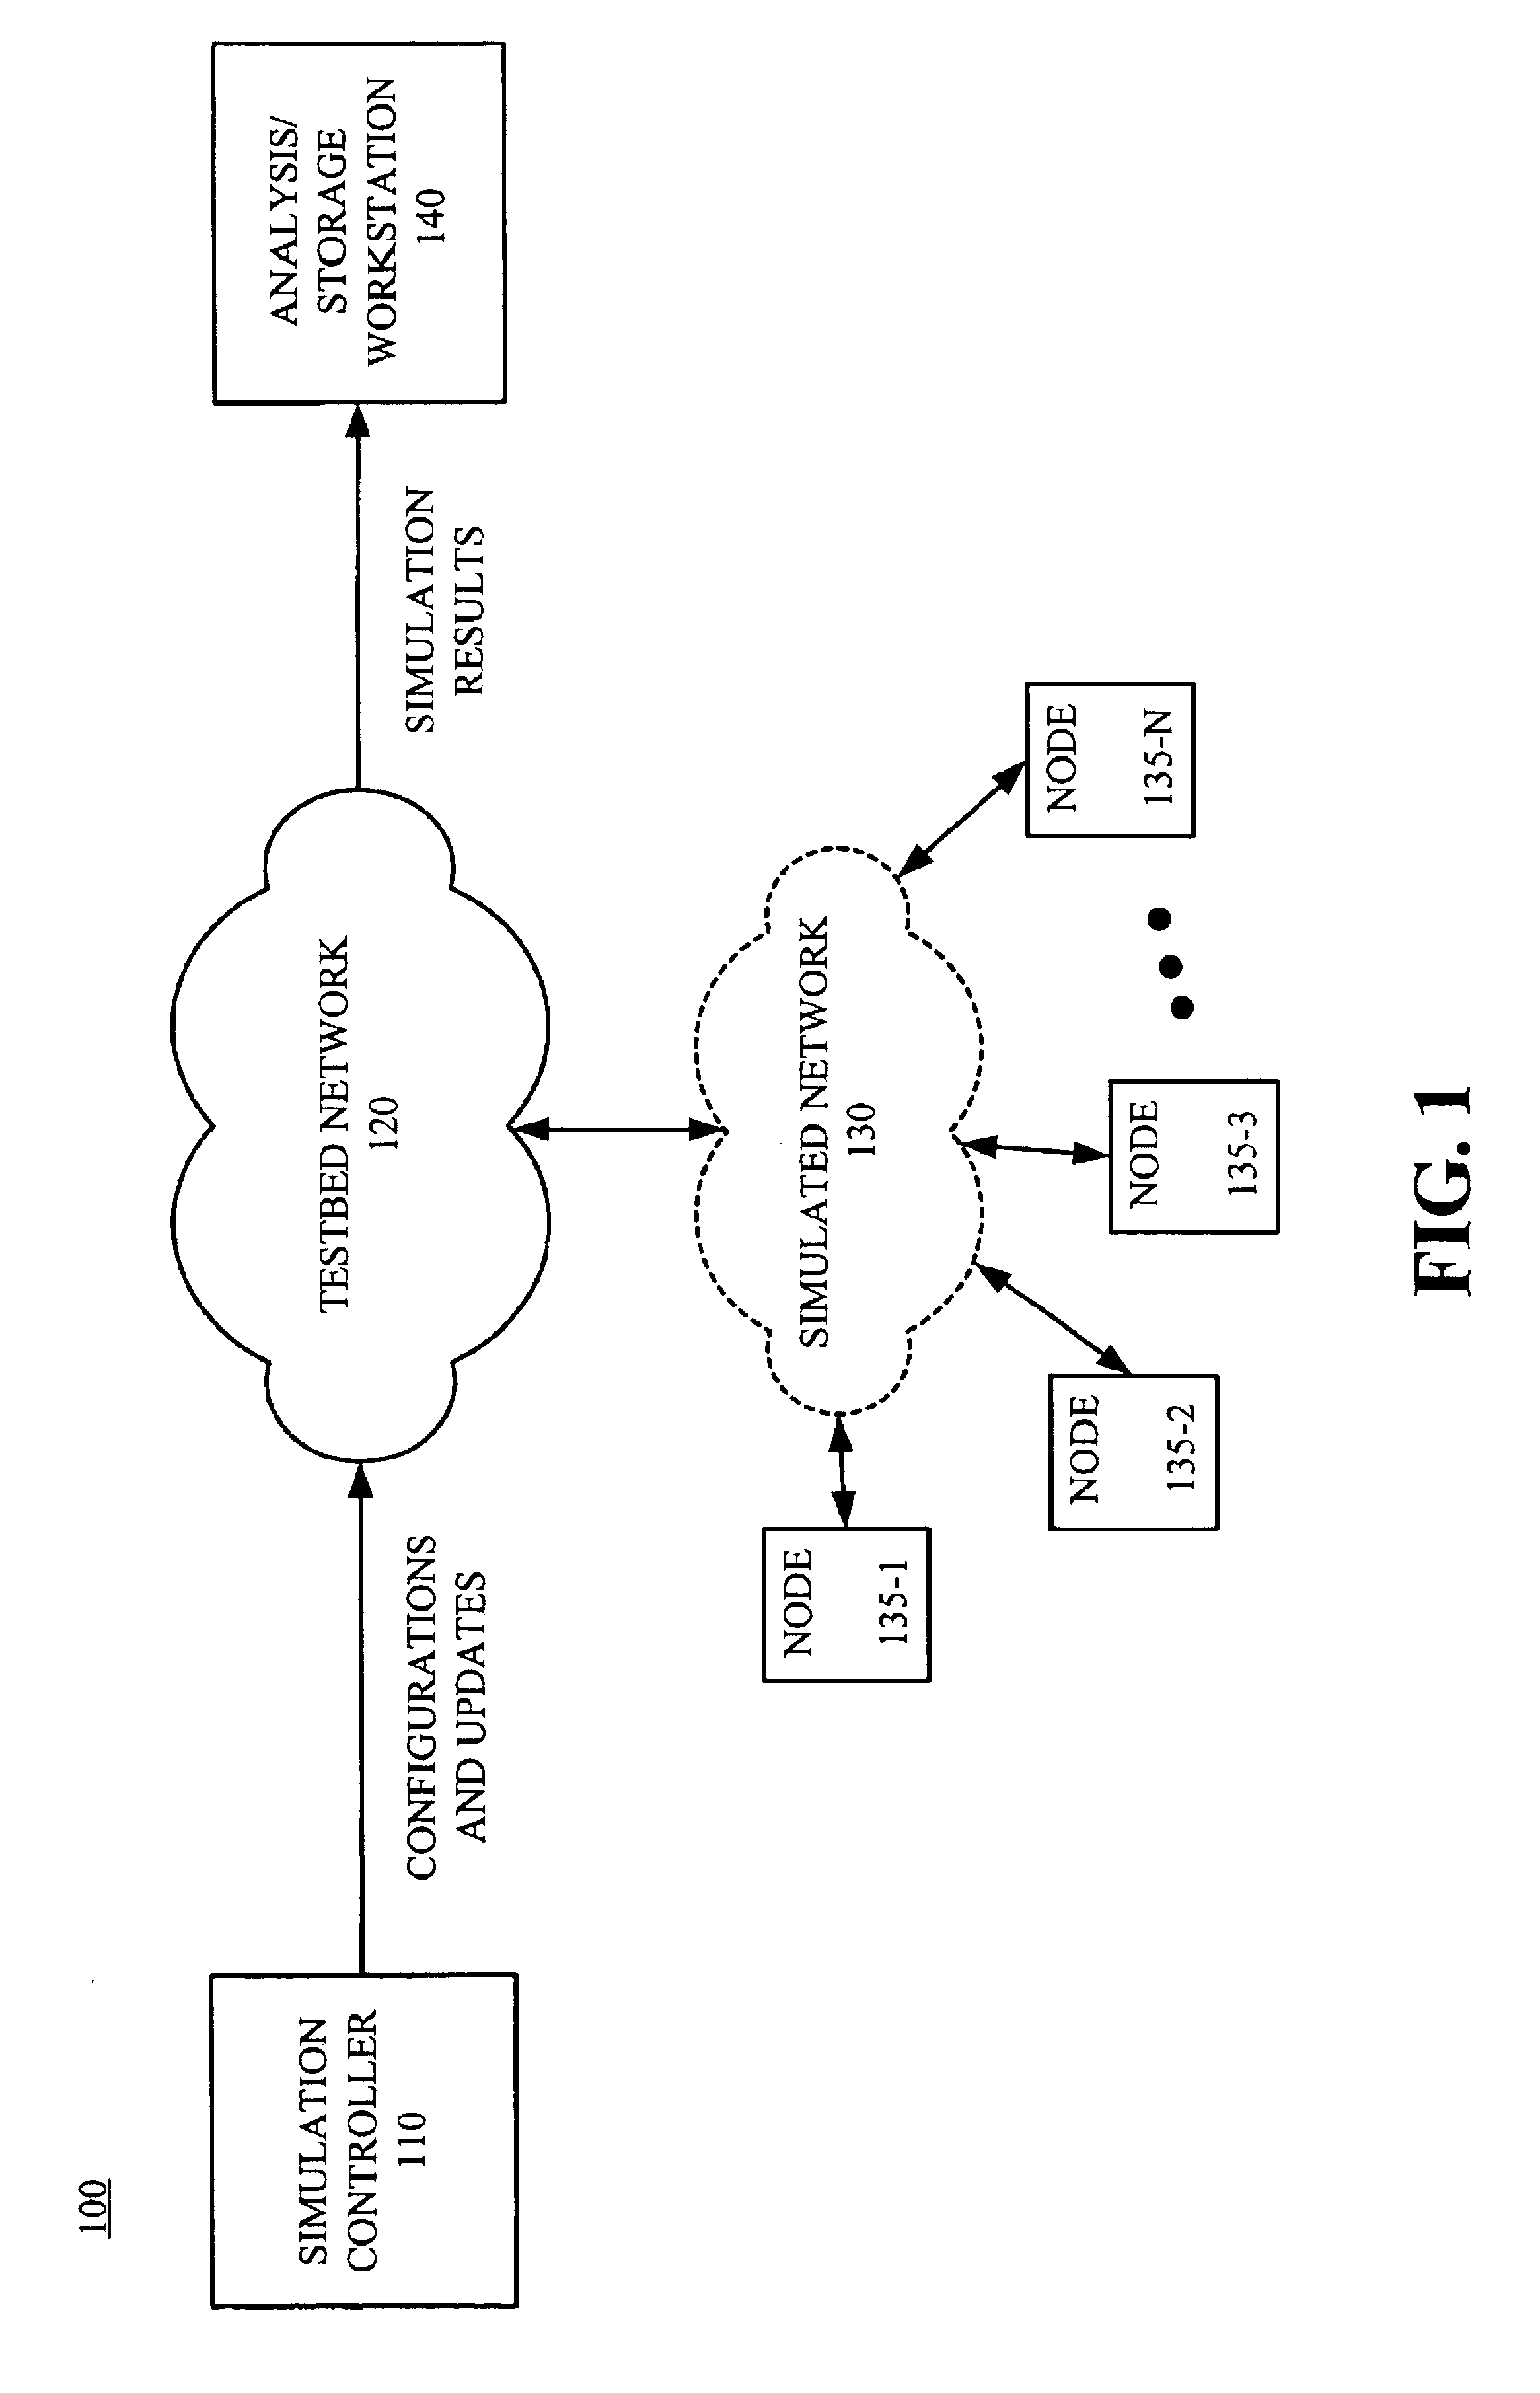 System and method for testing protocols for ad hoc networks